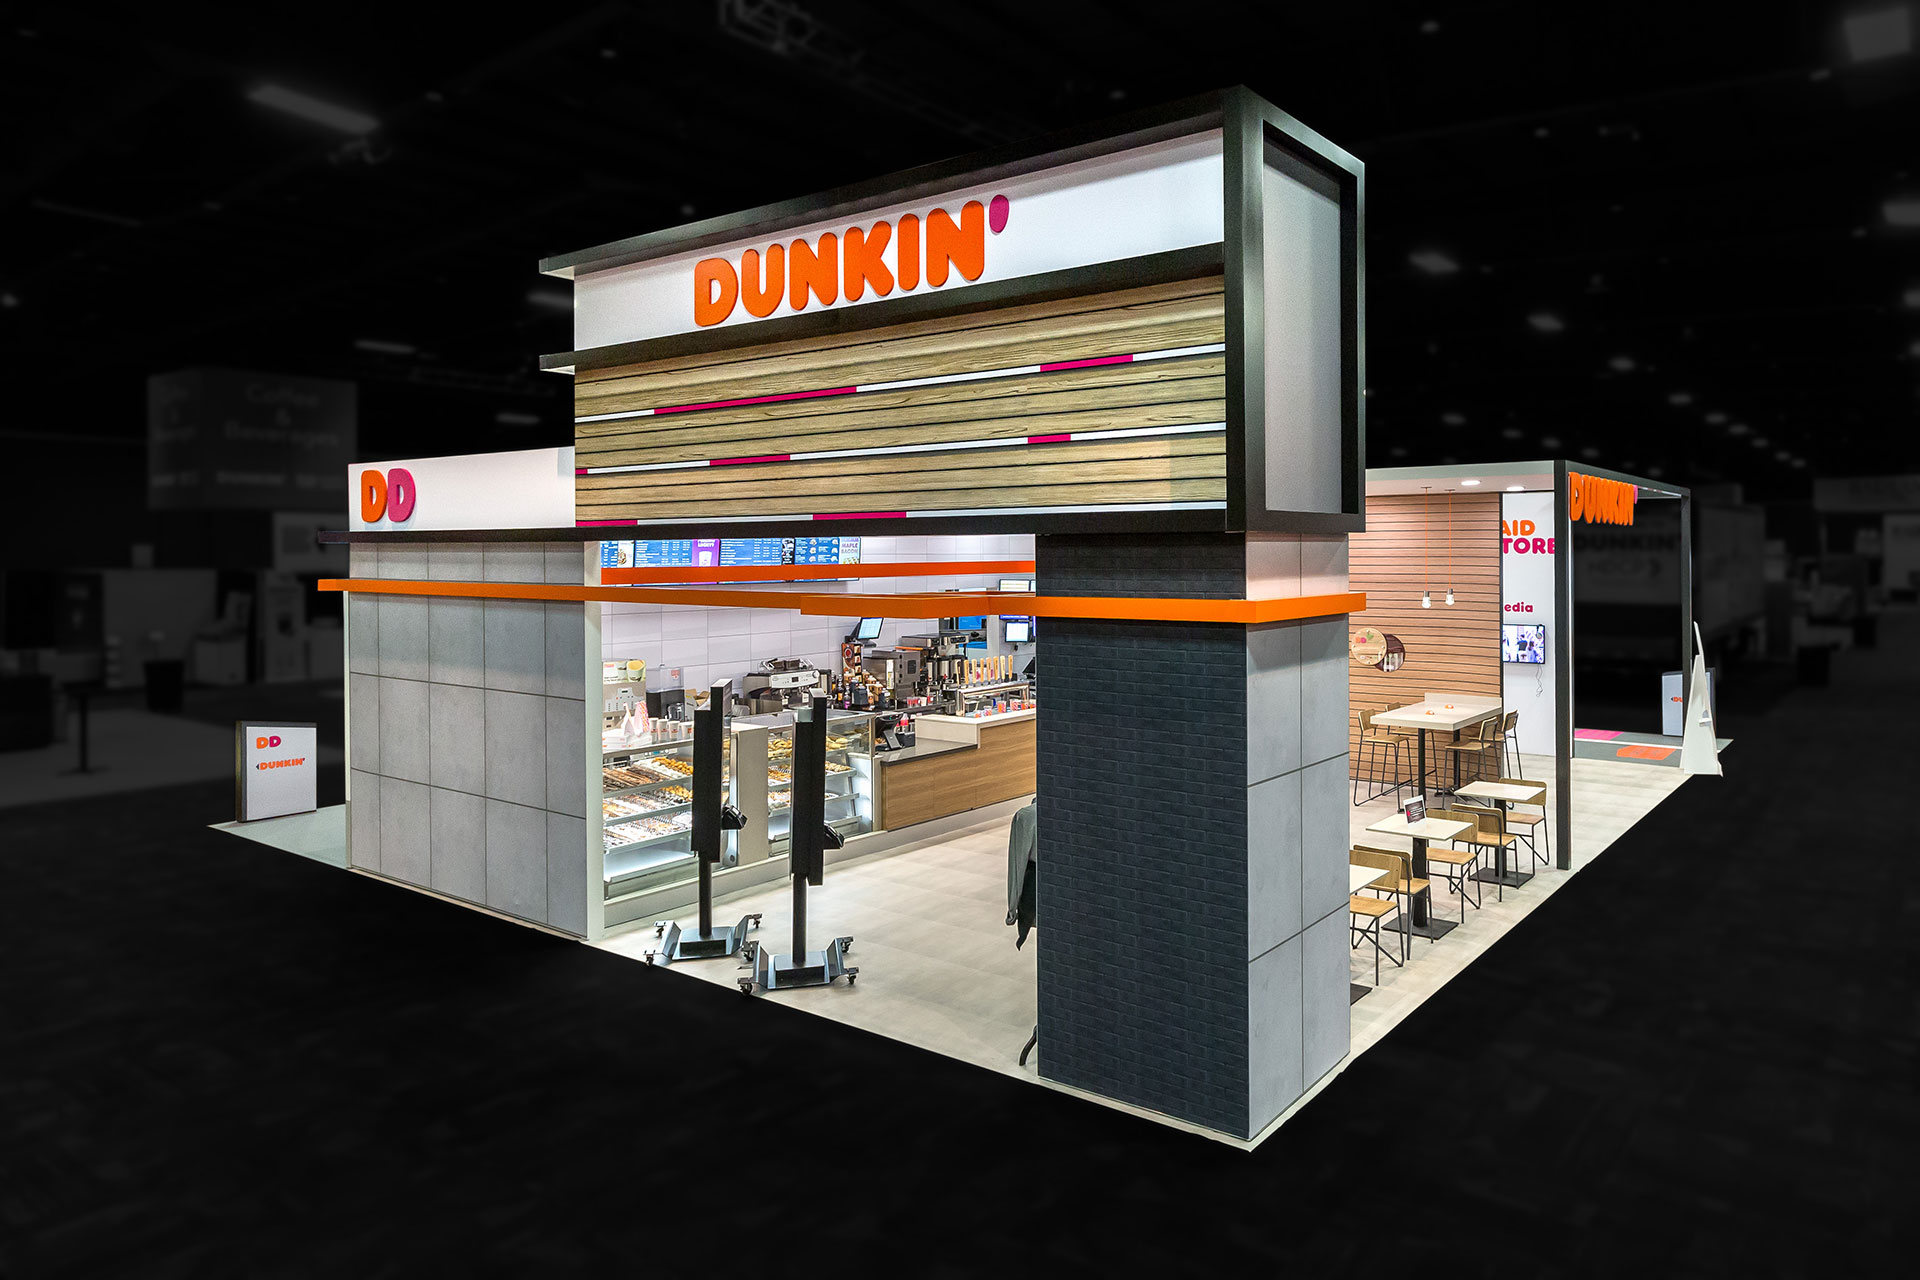 A trade show exhibit which looks like a Dunkin Donuts store clad in grey bricks and tiles and showing the interior counter, display case, and tables from a high perspective and edited so that the area around the exhibit is black and blurred.